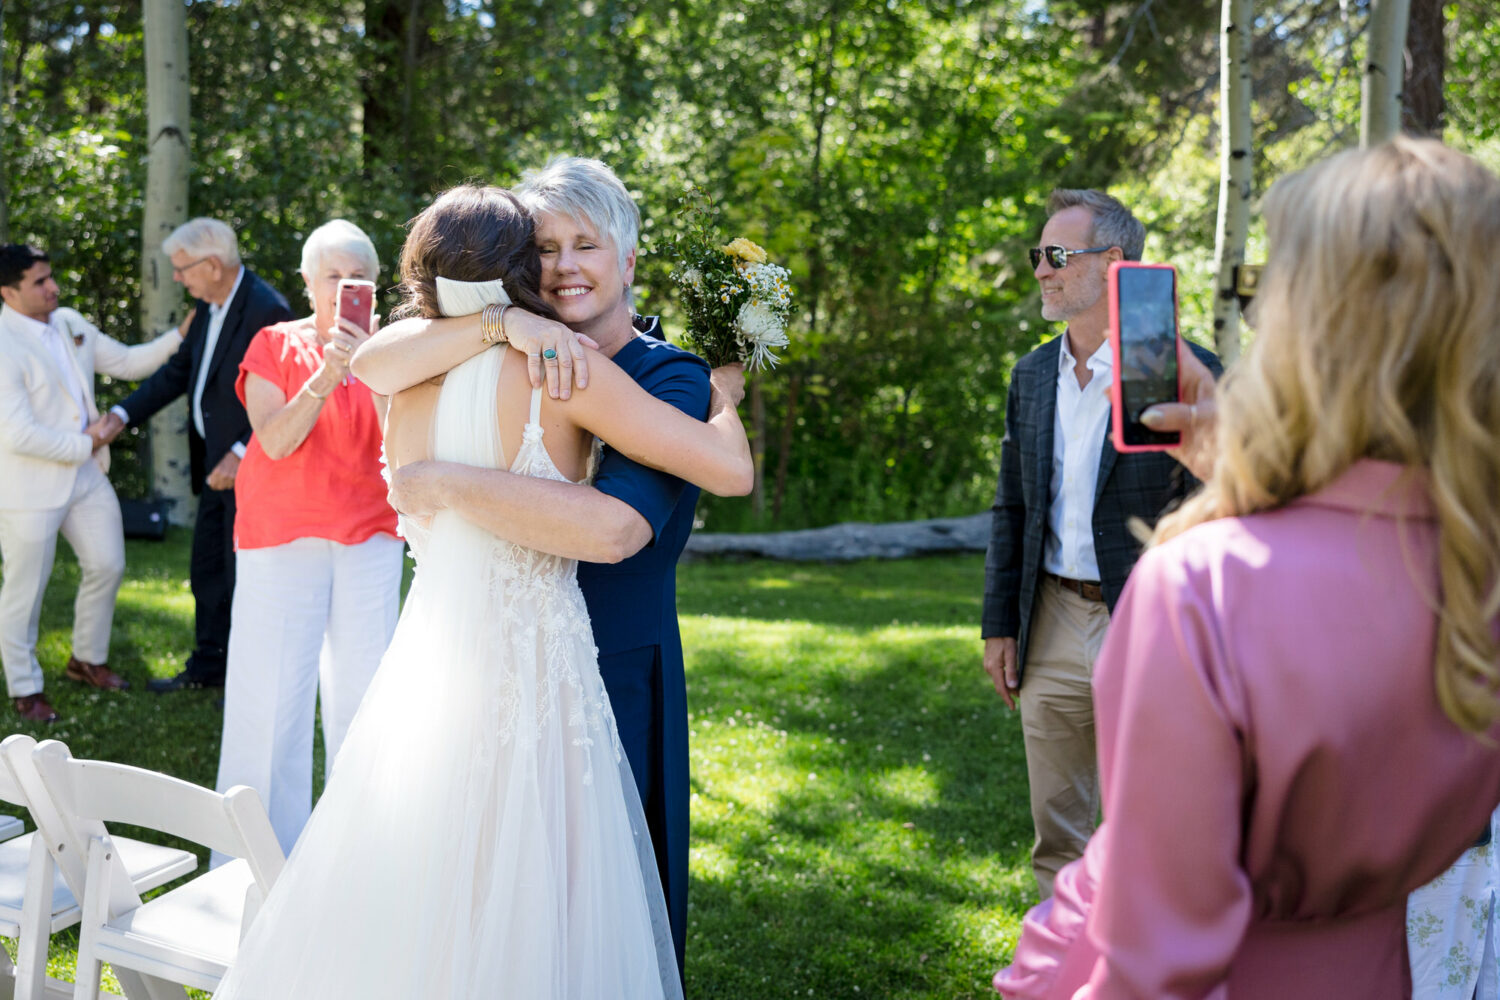 Family members use an iPhone to photograph a wedding.